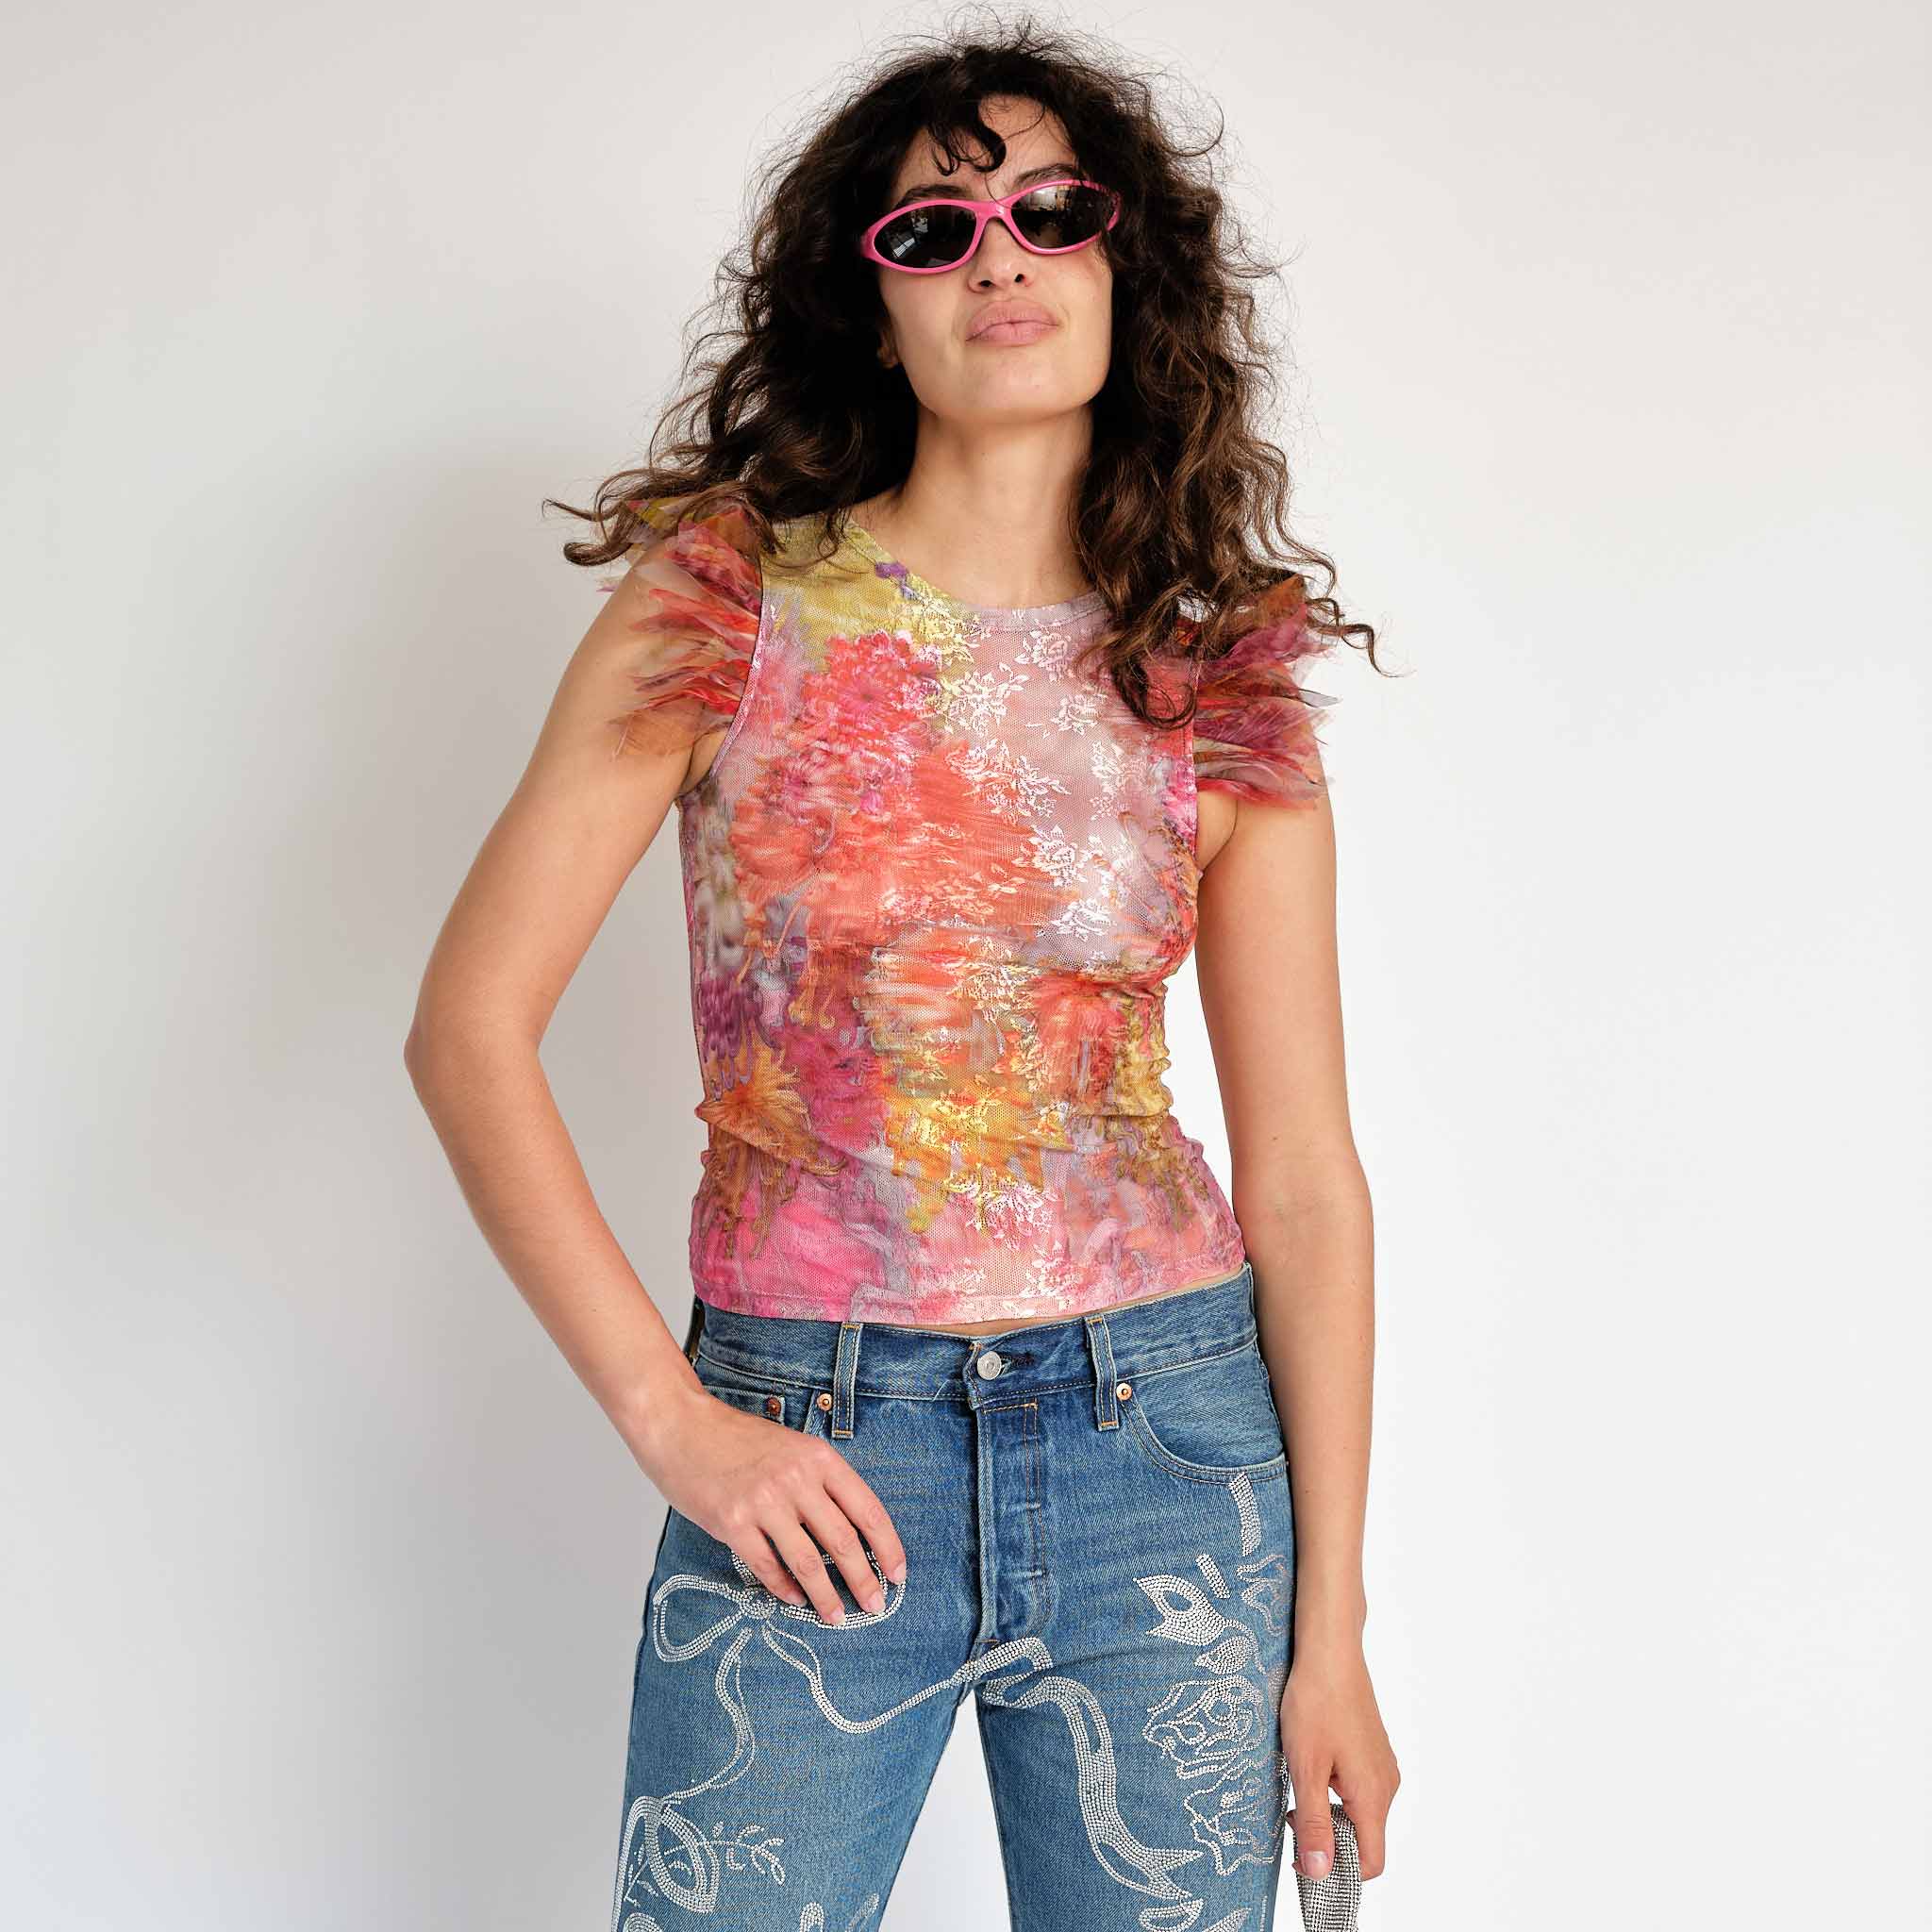 A model wears the Dachi top - a multicolored stretch lace tank top with pink feathers around the arm holes - front view.